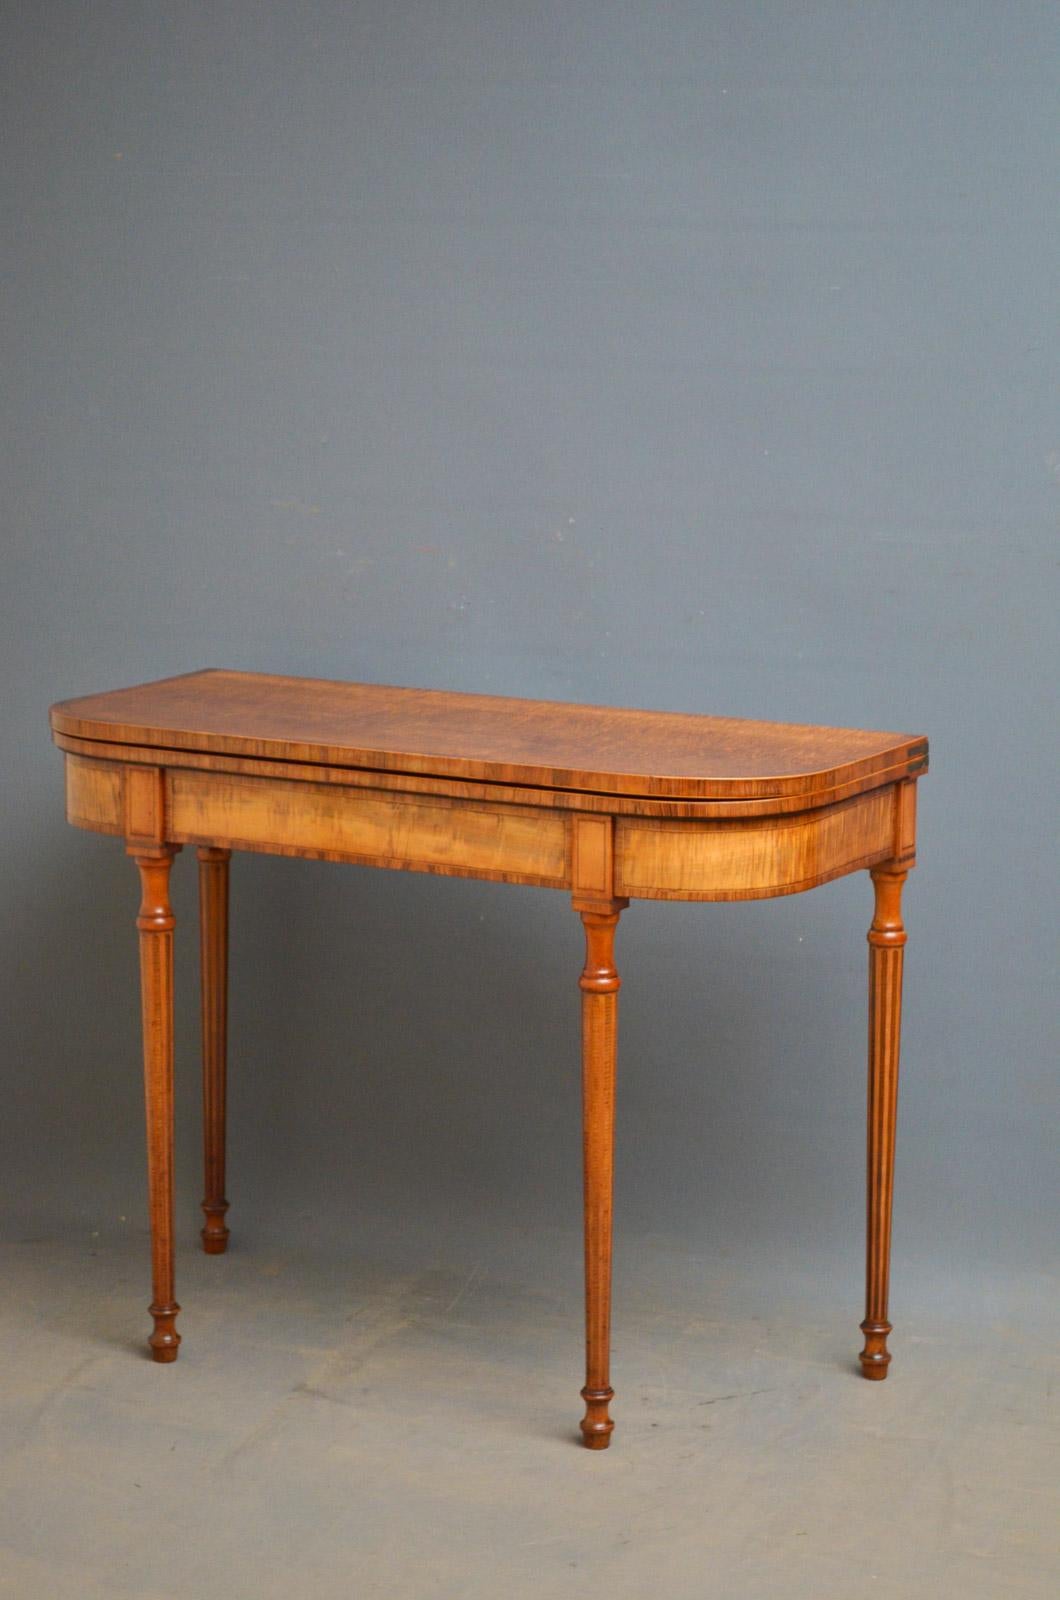 Sn4453 fine quality Georgian, fiddle back sycamore D shape card table, having fold over top with coromandel crossbanding to edge above crossbanded frieze, flanked by string inlaid panels, standing on slender, turned and inlaid legs. This antique